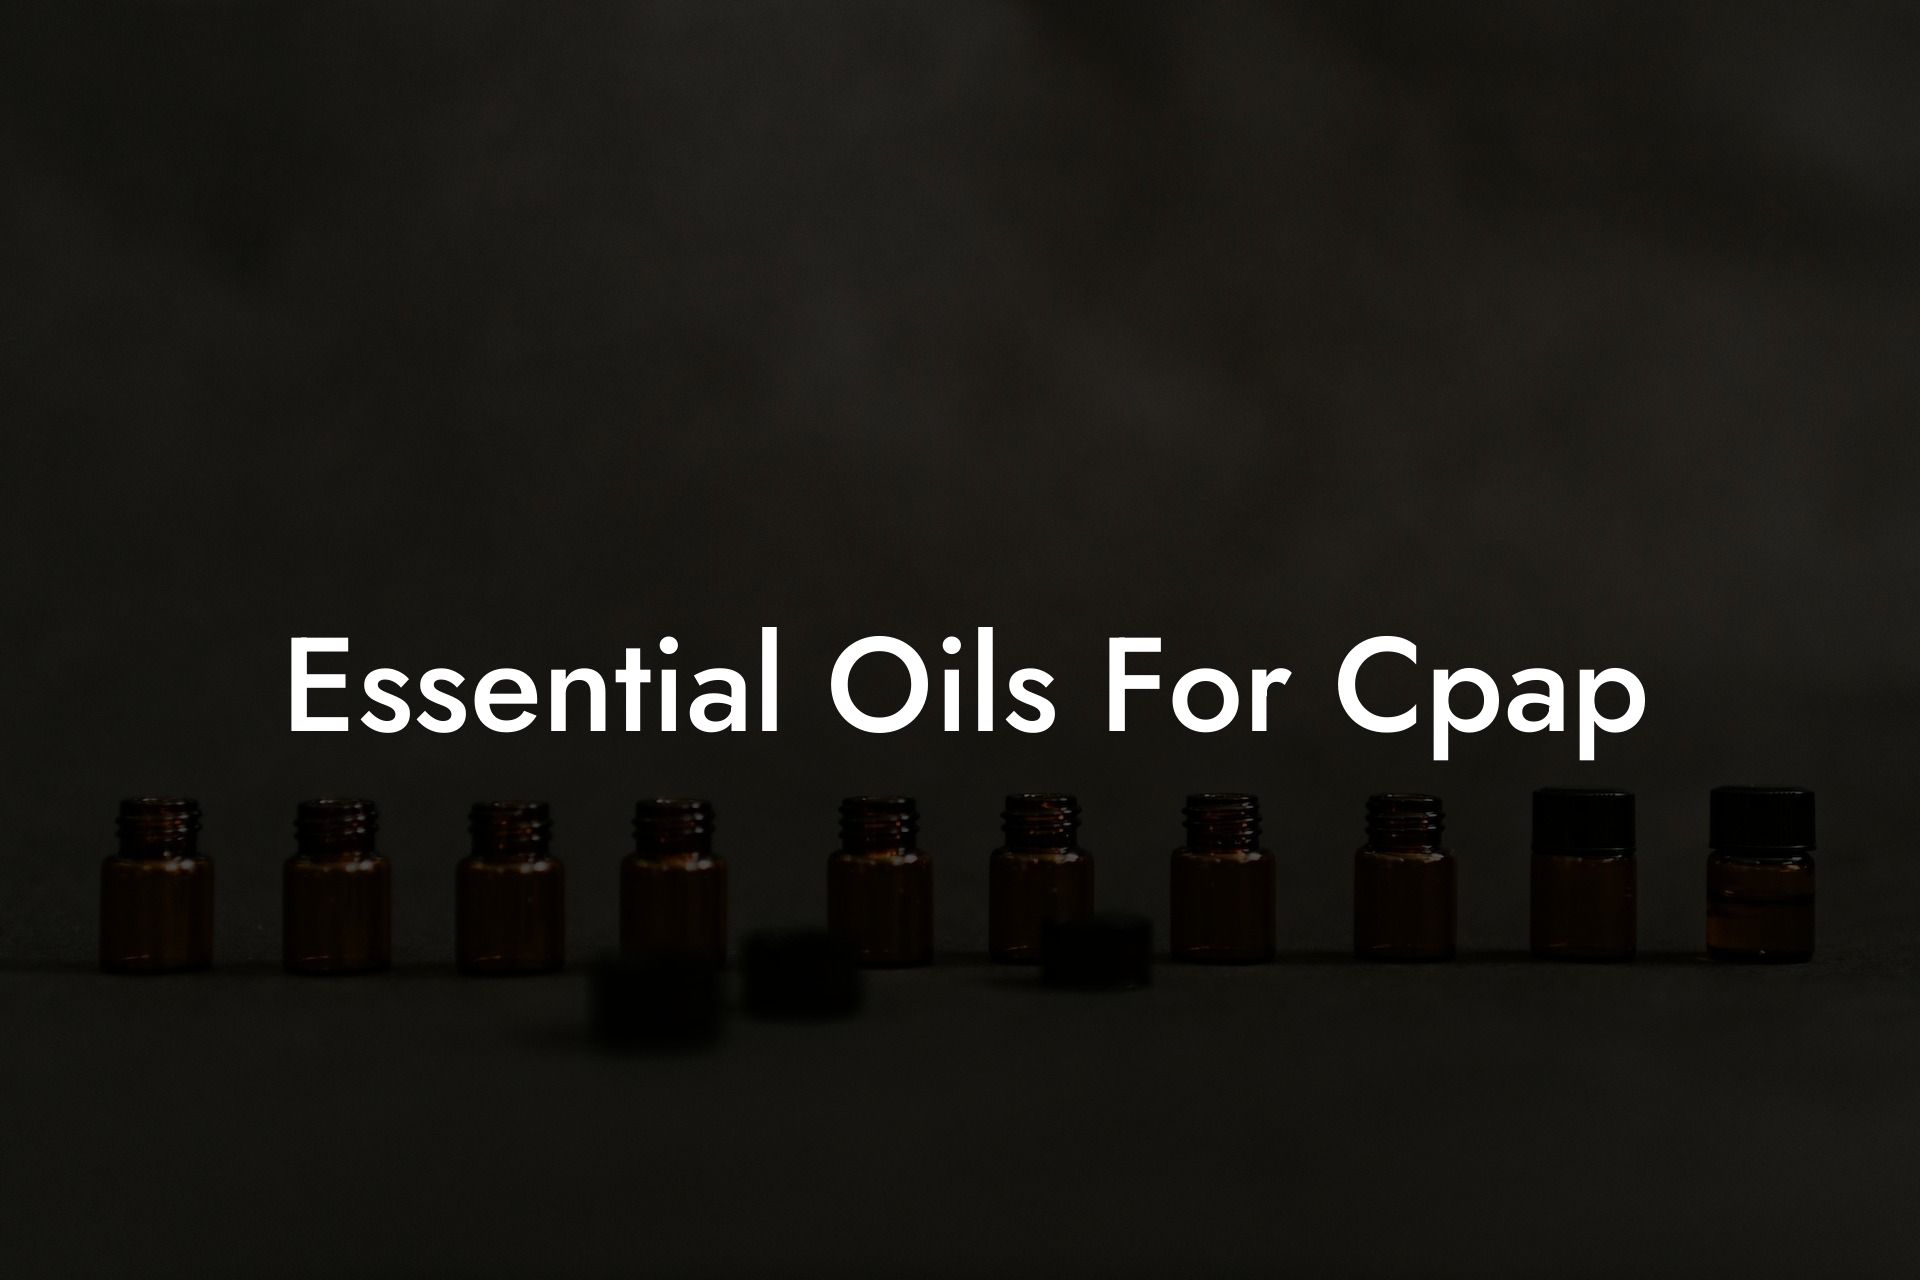 Essential Oils For Cpap